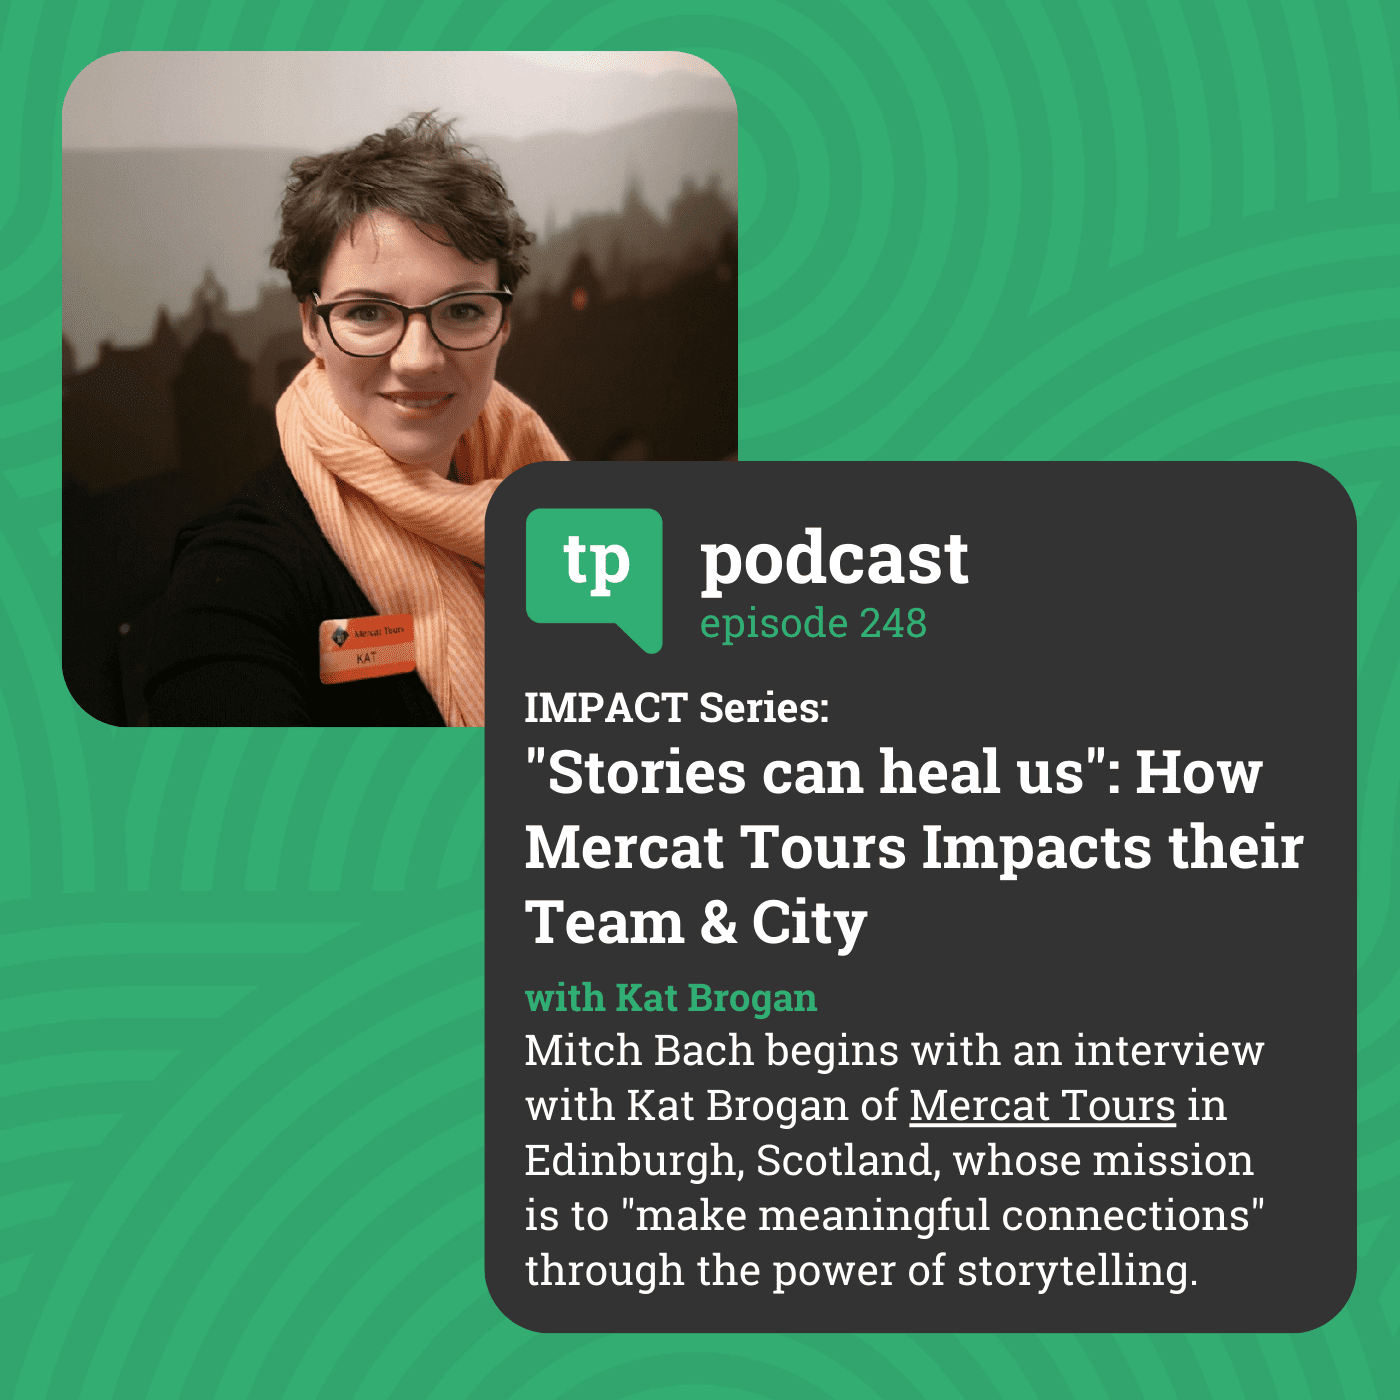 IMPACT Series: ”Stories can heal us”: How Mercat Tours Impacts their Team & City